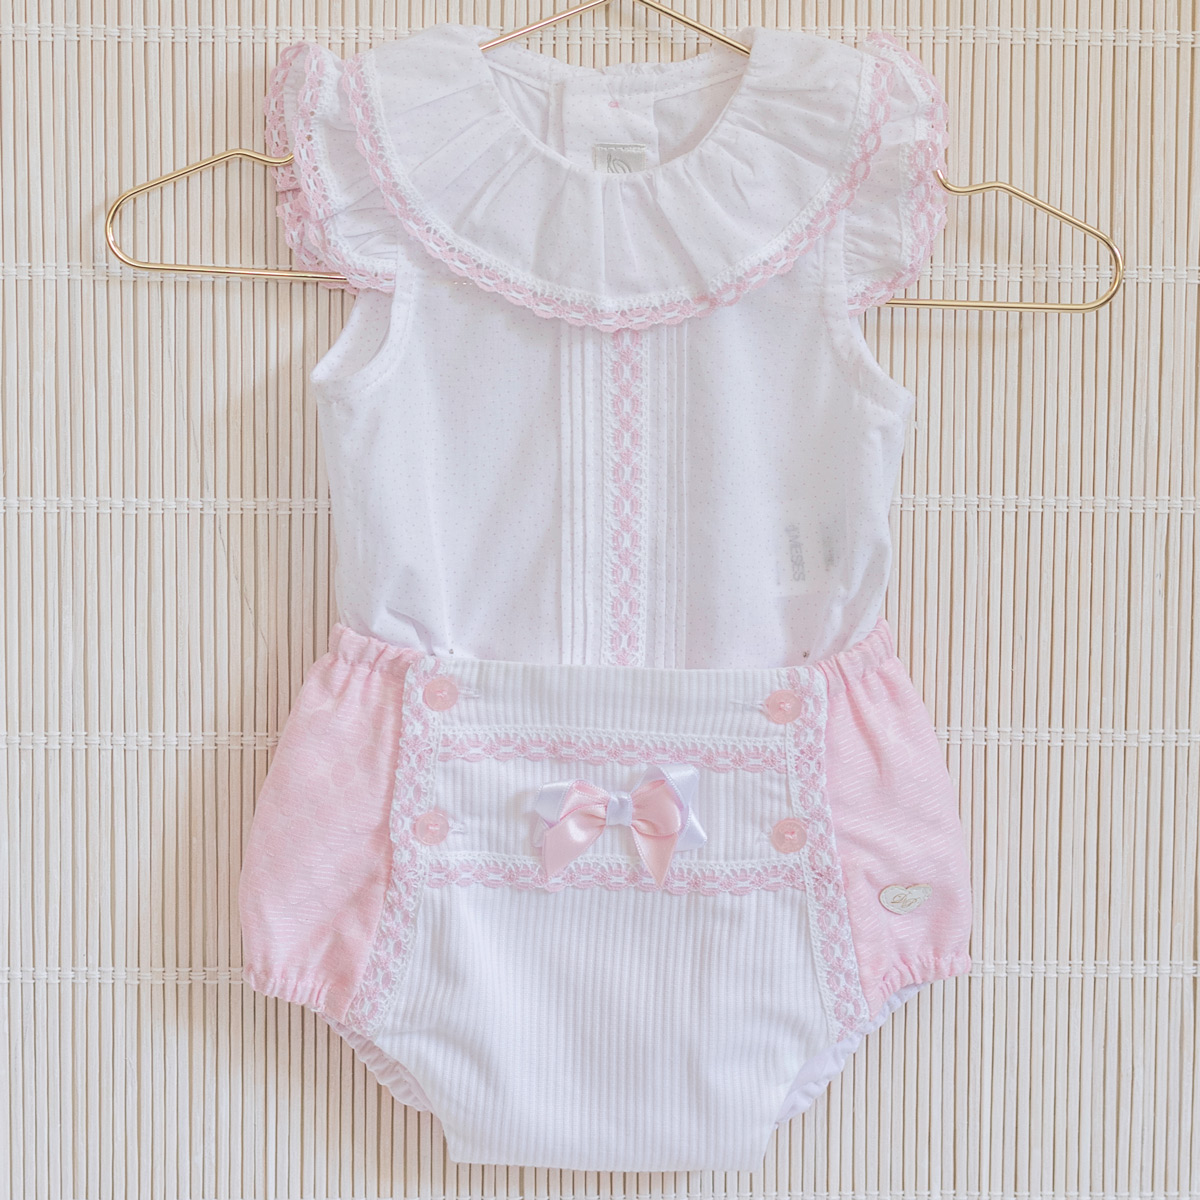 Spanish Style Baby Girl White Ruffle Collar Top and Floral Jam Pants Set 